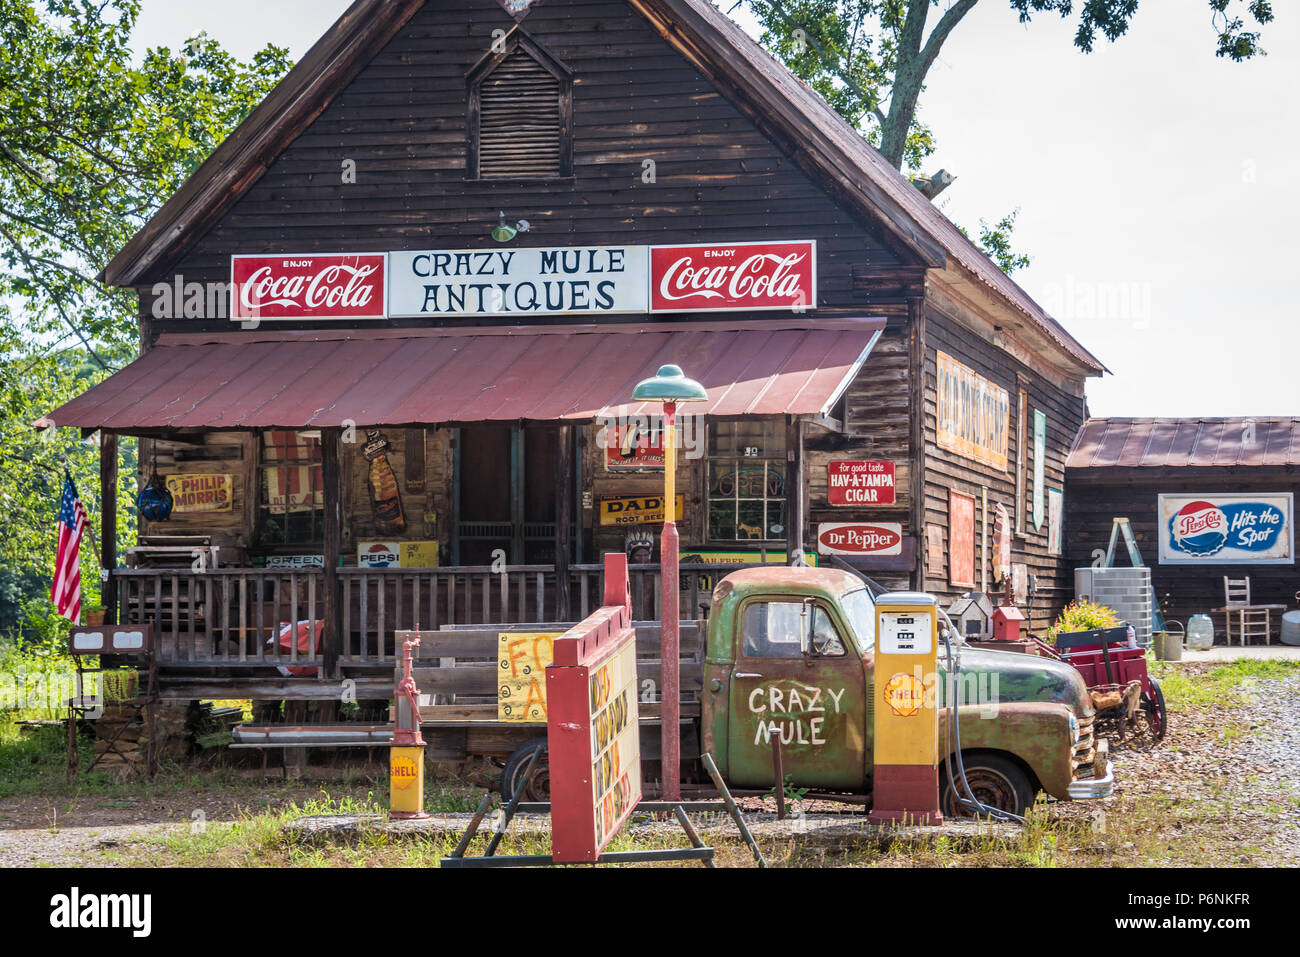 Crazy Mule Antiques, located in a 1909 Lula, Georgia general store building in the foothills of the Blue Ridge Mountains. (USA) Stock Photo